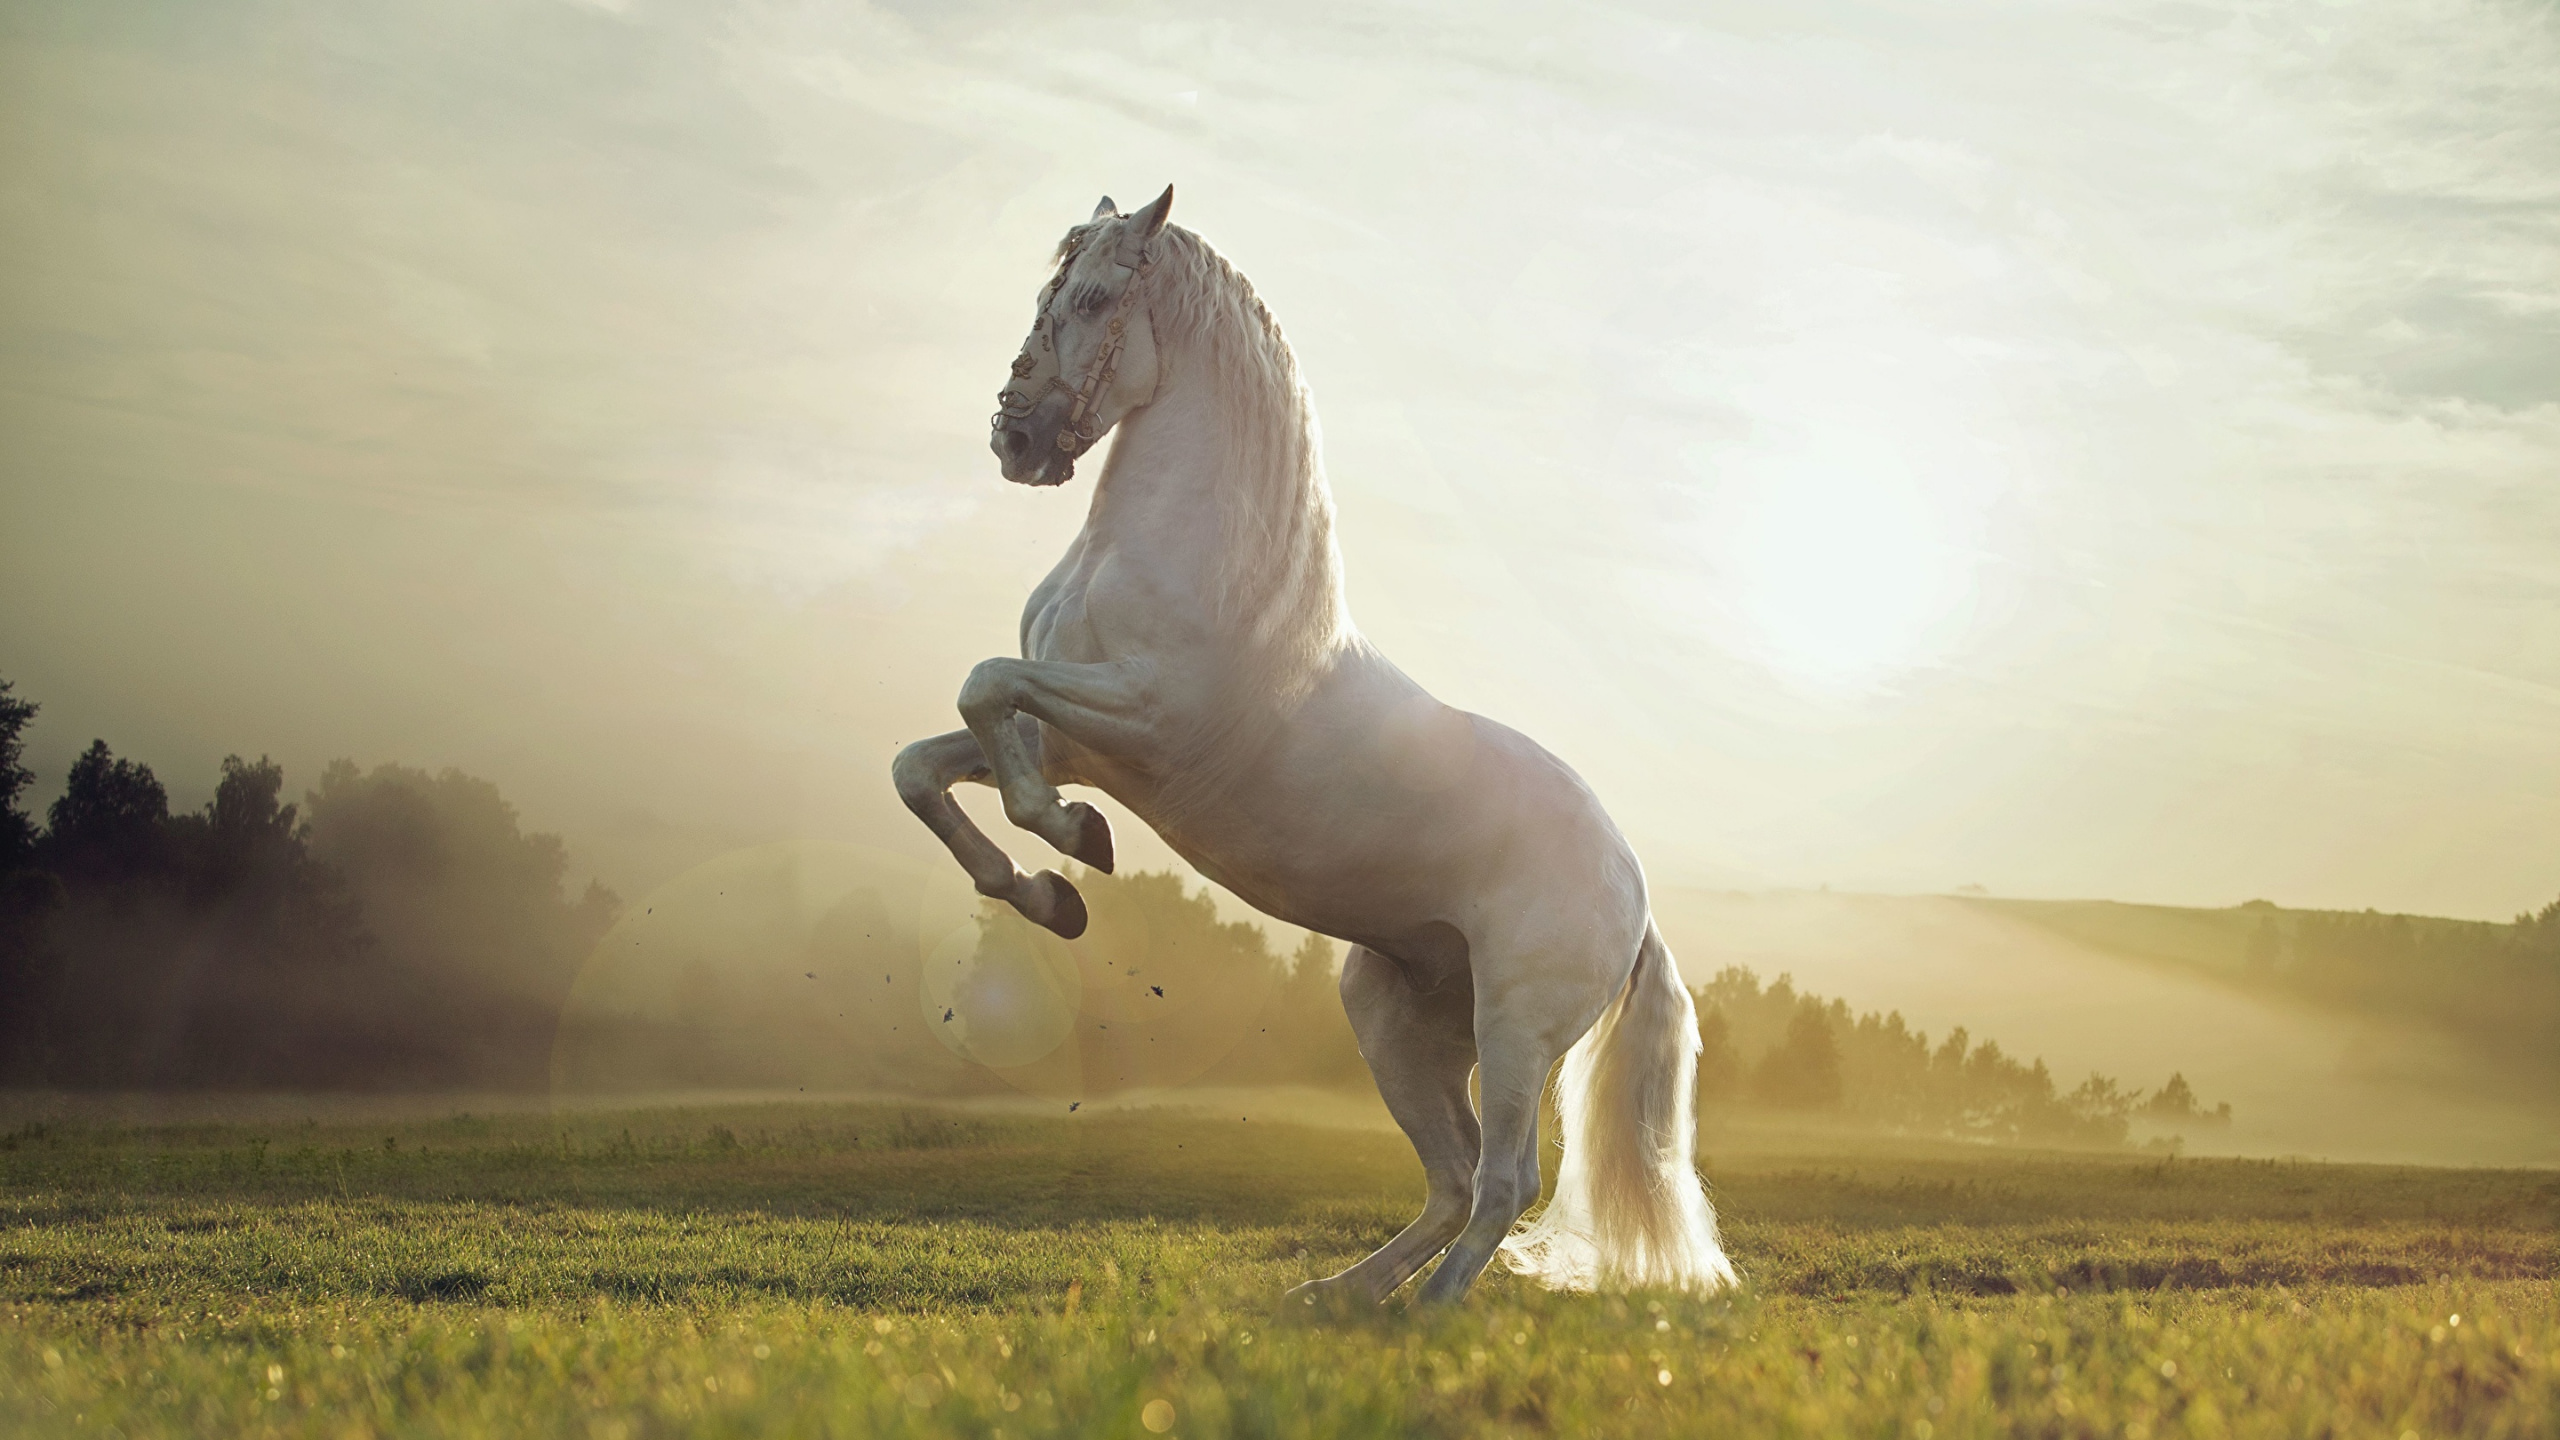 White Horse Running on Green Grass Field During Daytime. Wallpaper in 2560x1440 Resolution